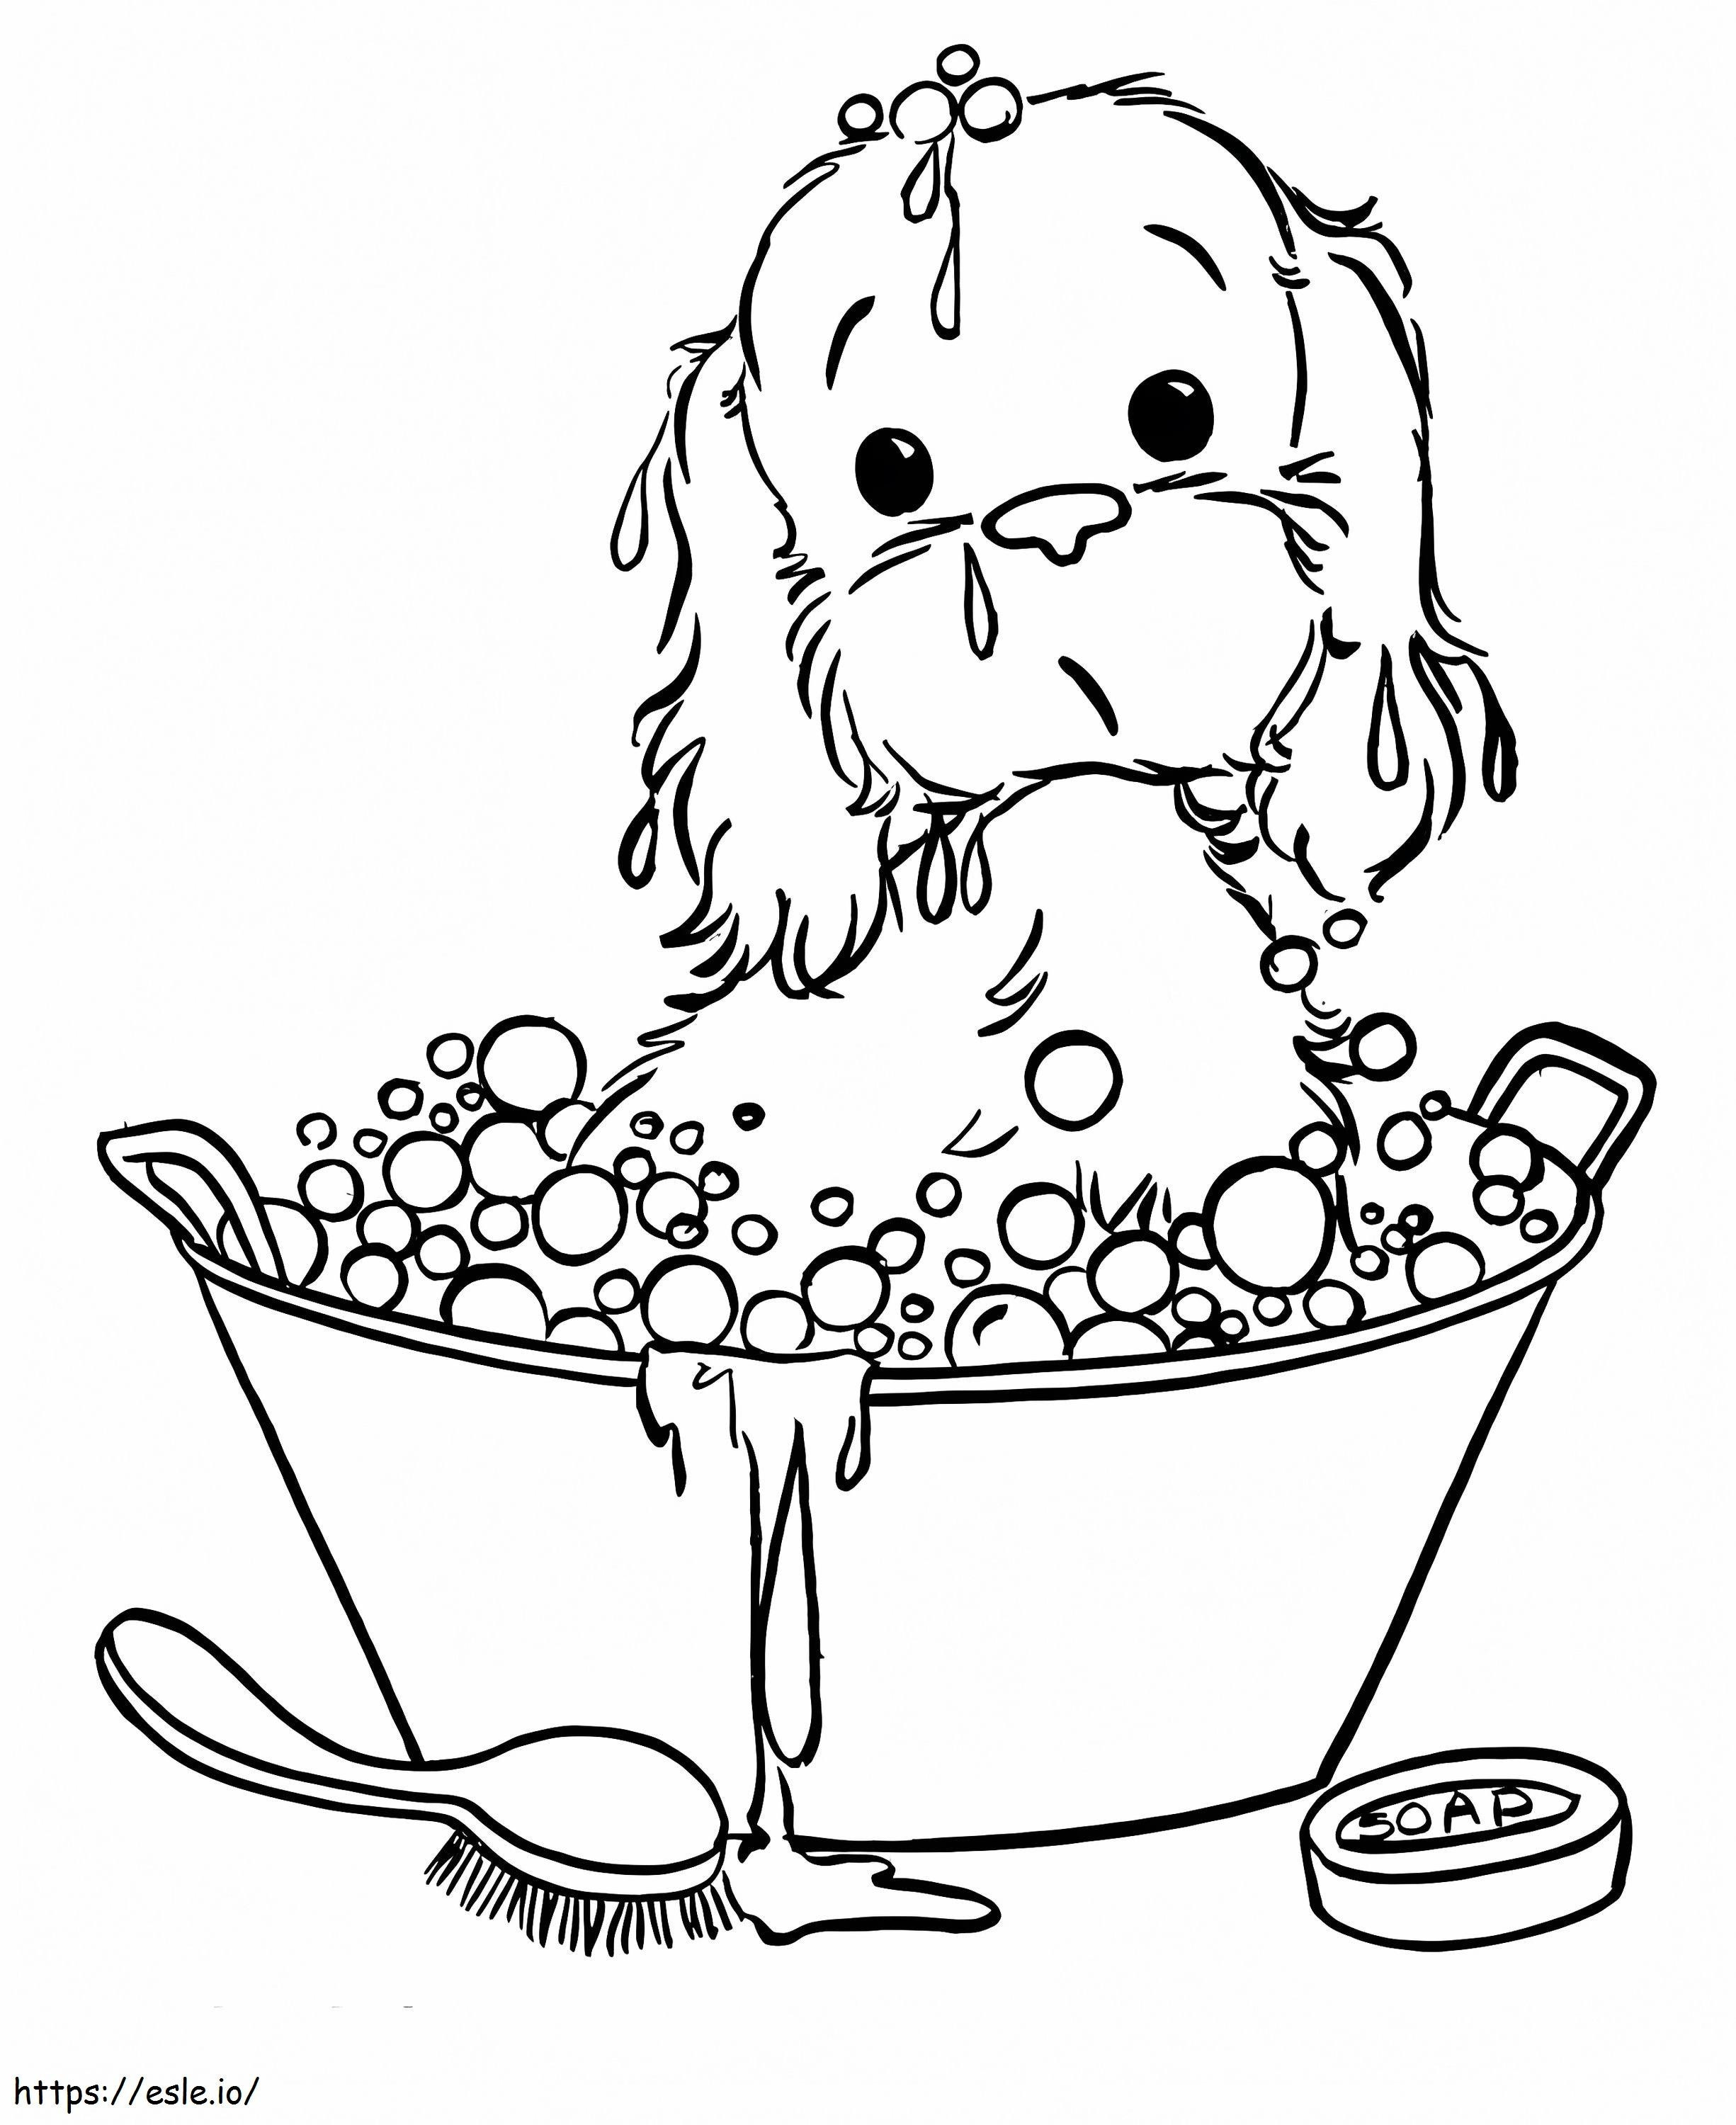 Puppy Shower coloring page